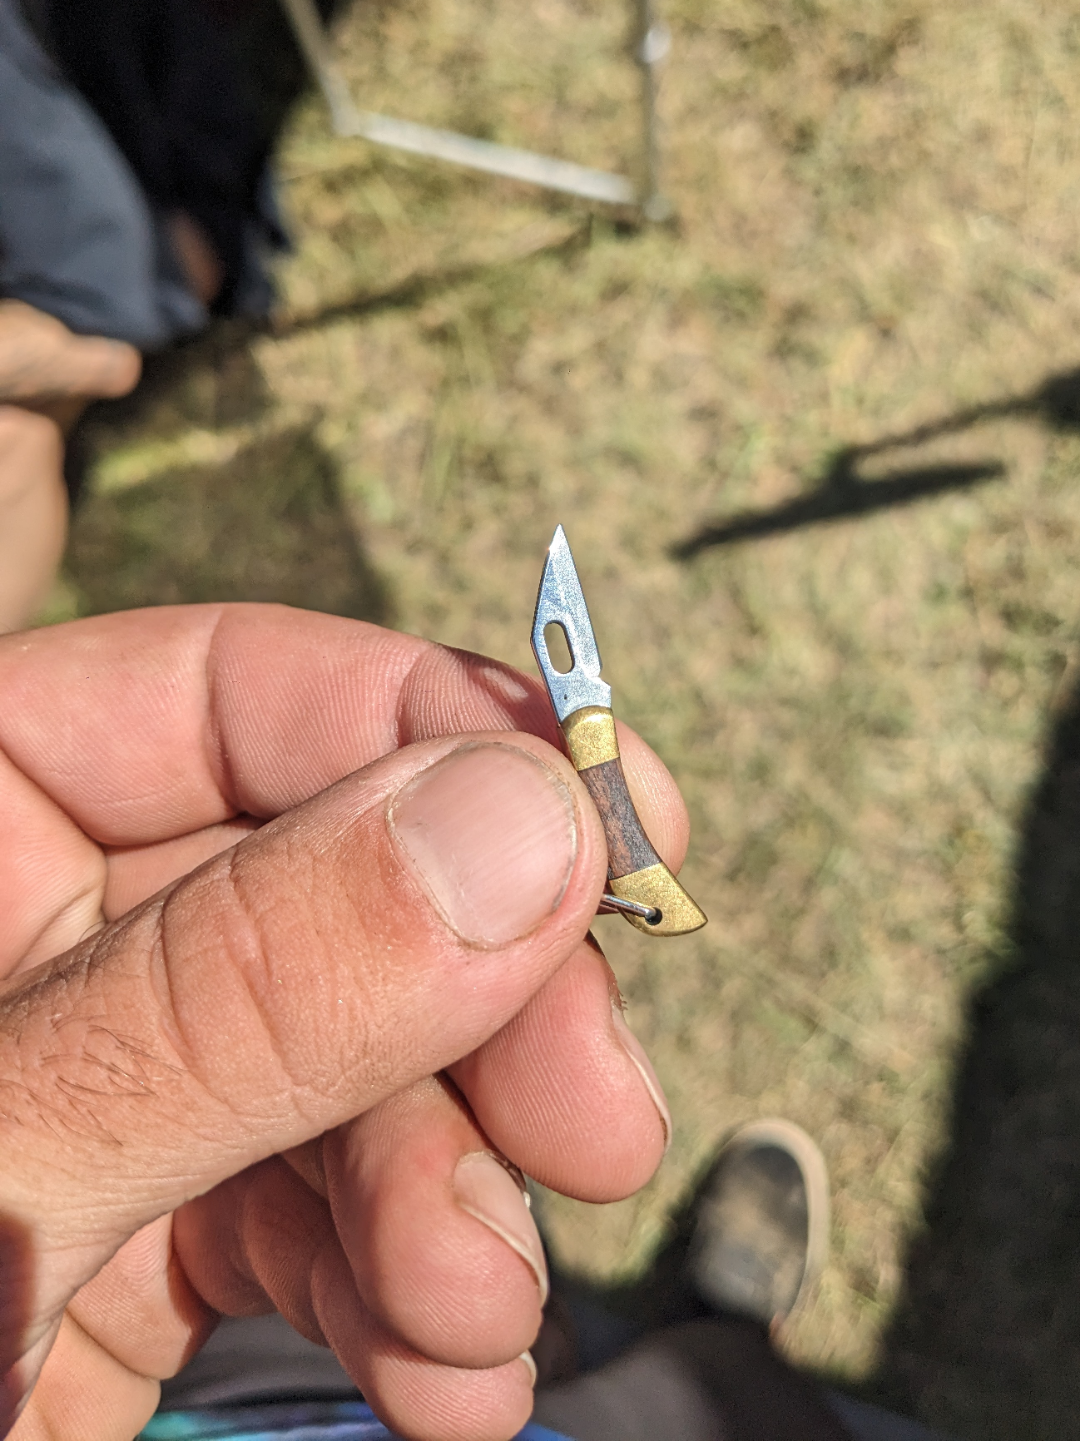 Close-up of a tiny knife that's much smaller than the thumb holding it